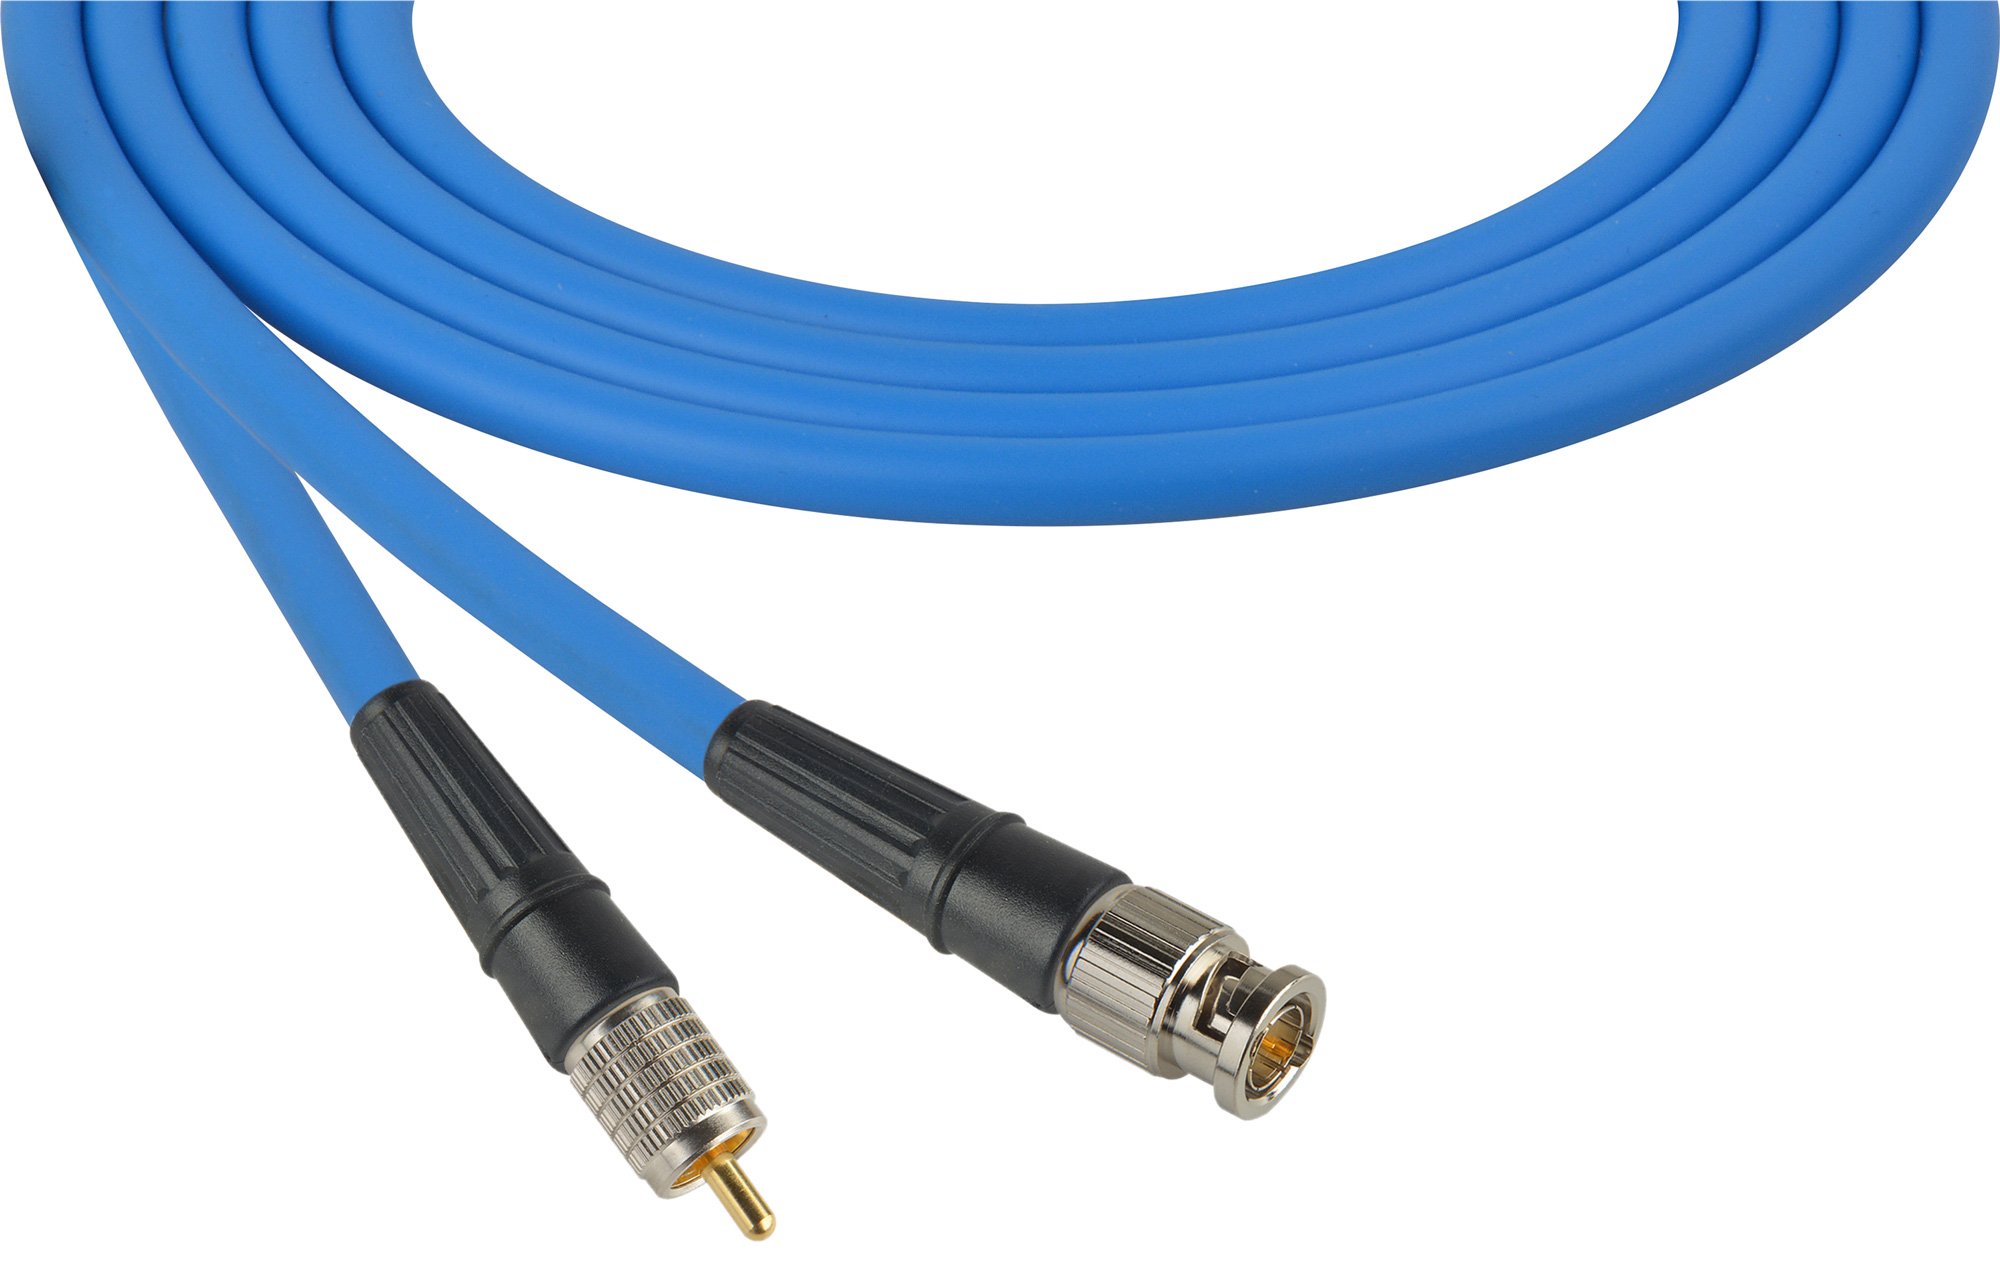 BNC to BNC Video Cables